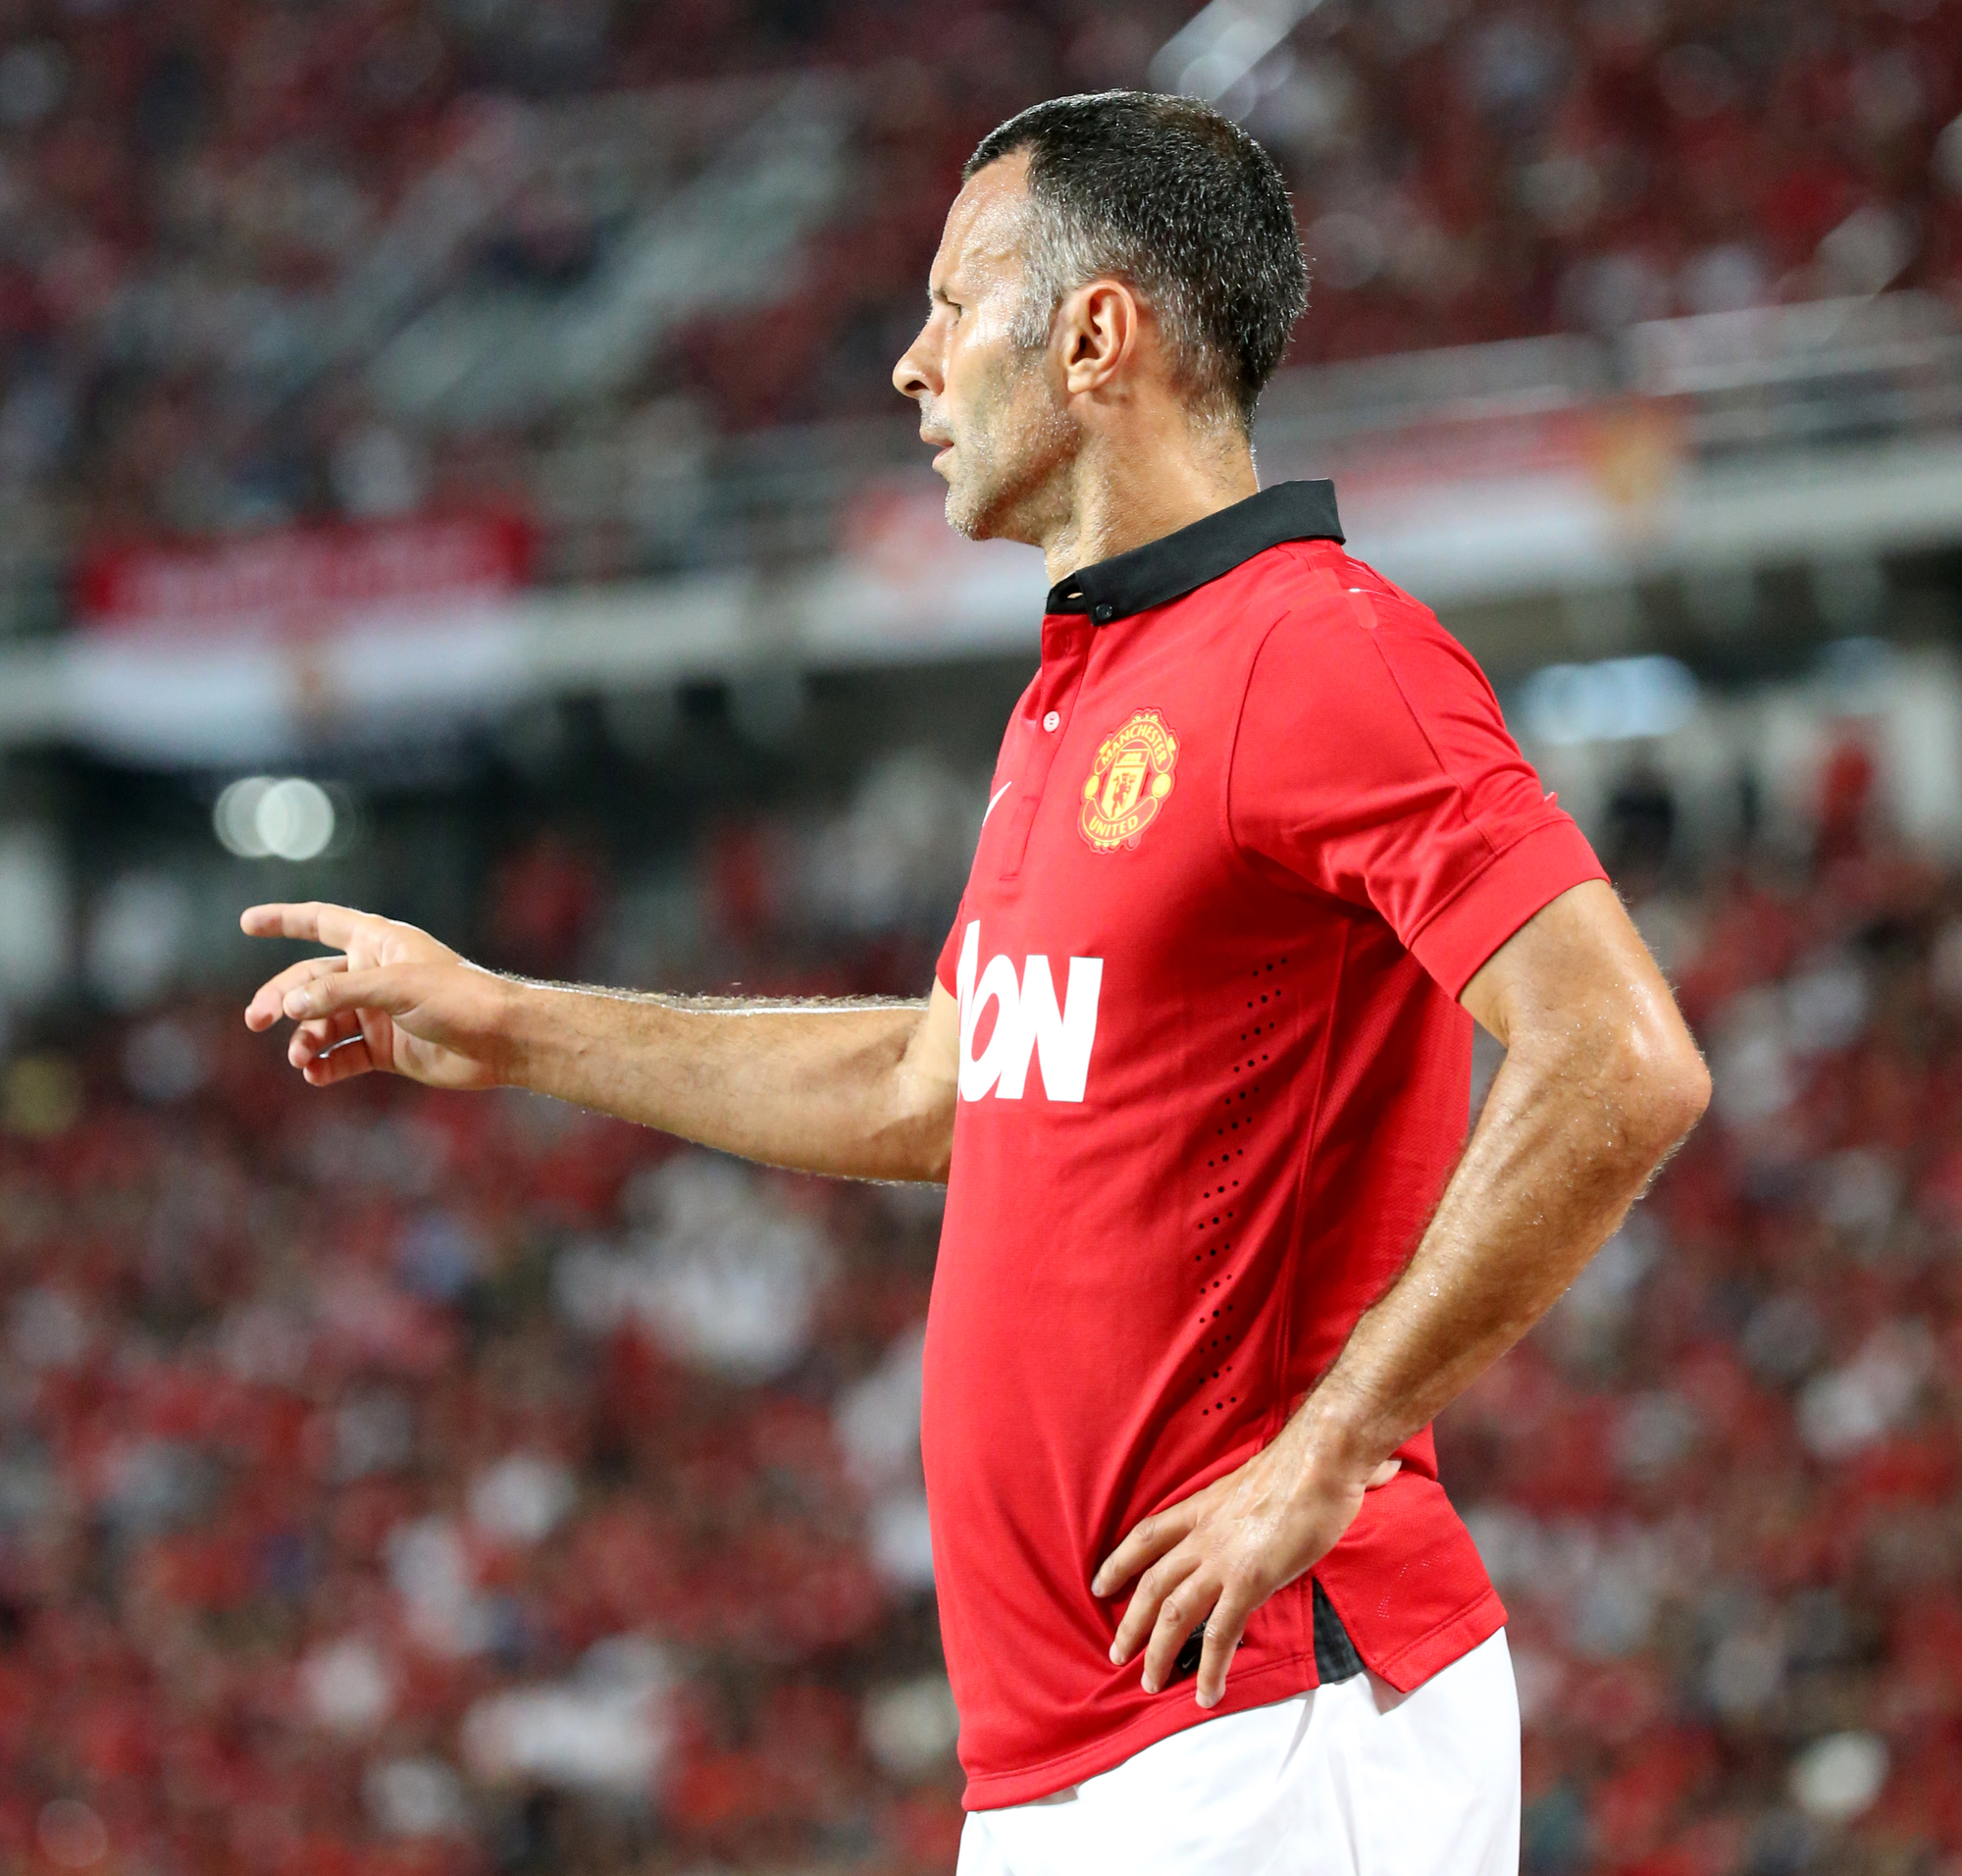 Ryan Giggs, the best player in the history of Manchester United